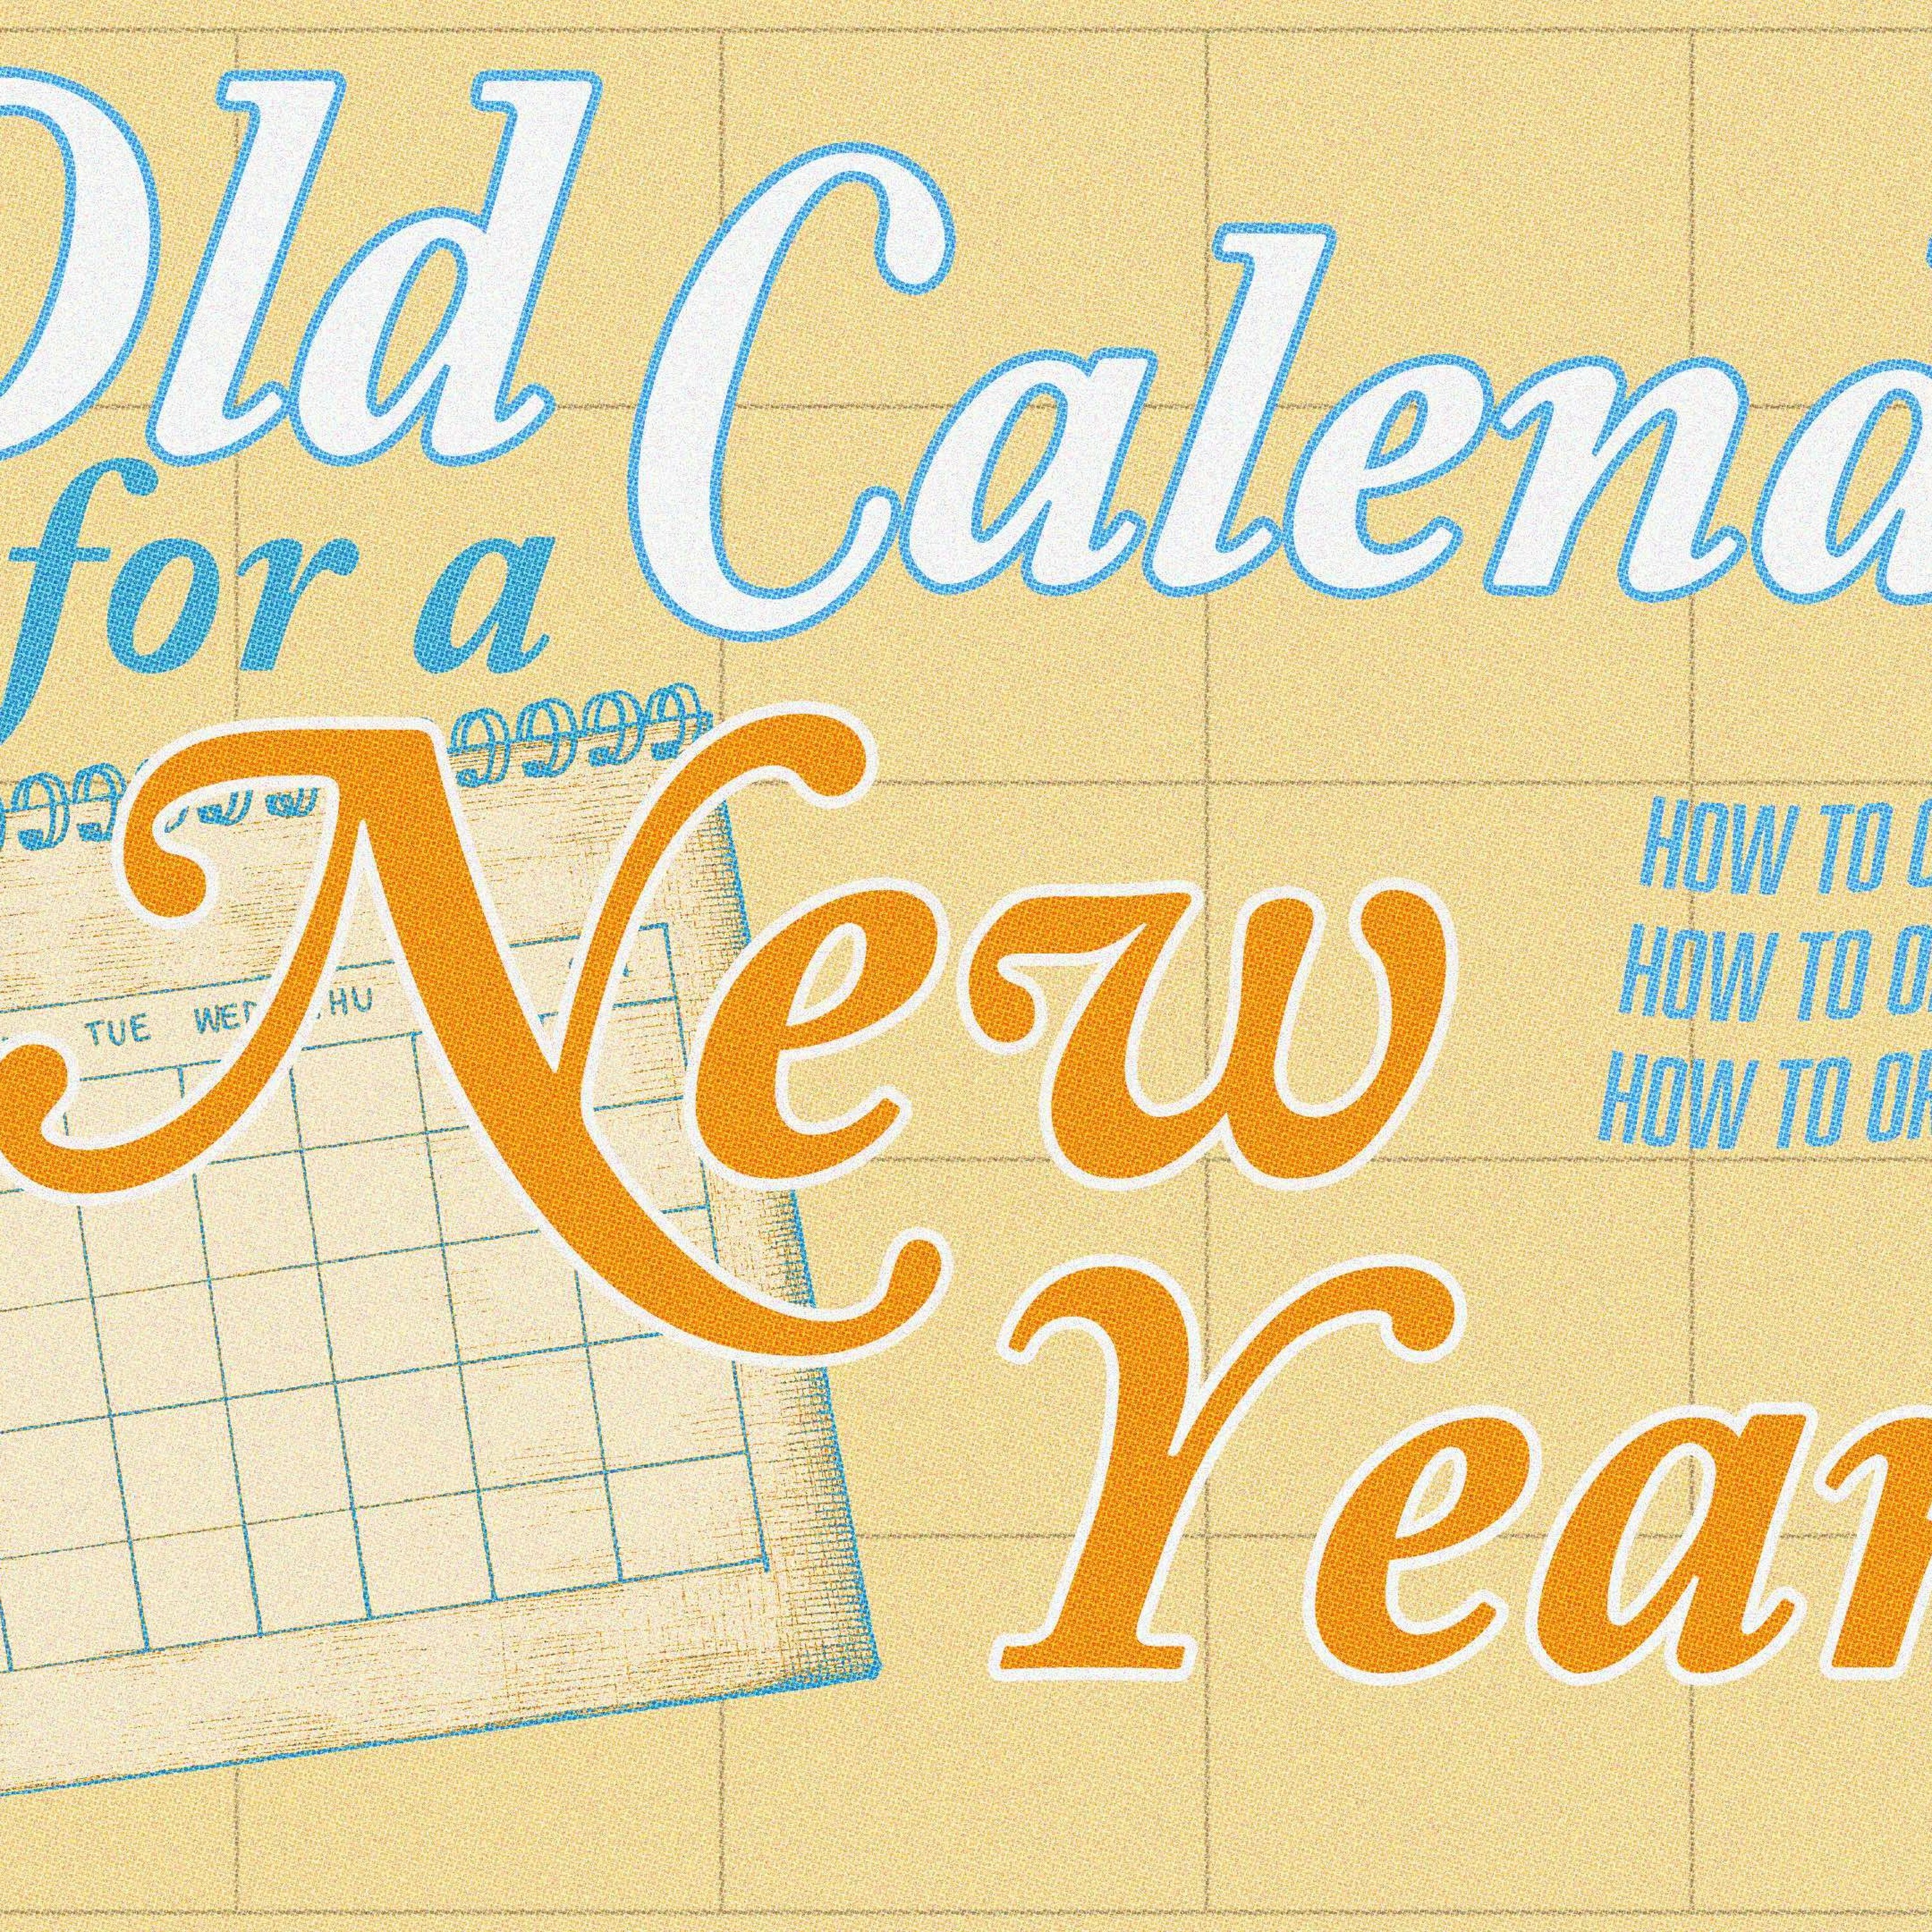 How To Organize A Week | Old Calendar For A New Year | Ethan Magness